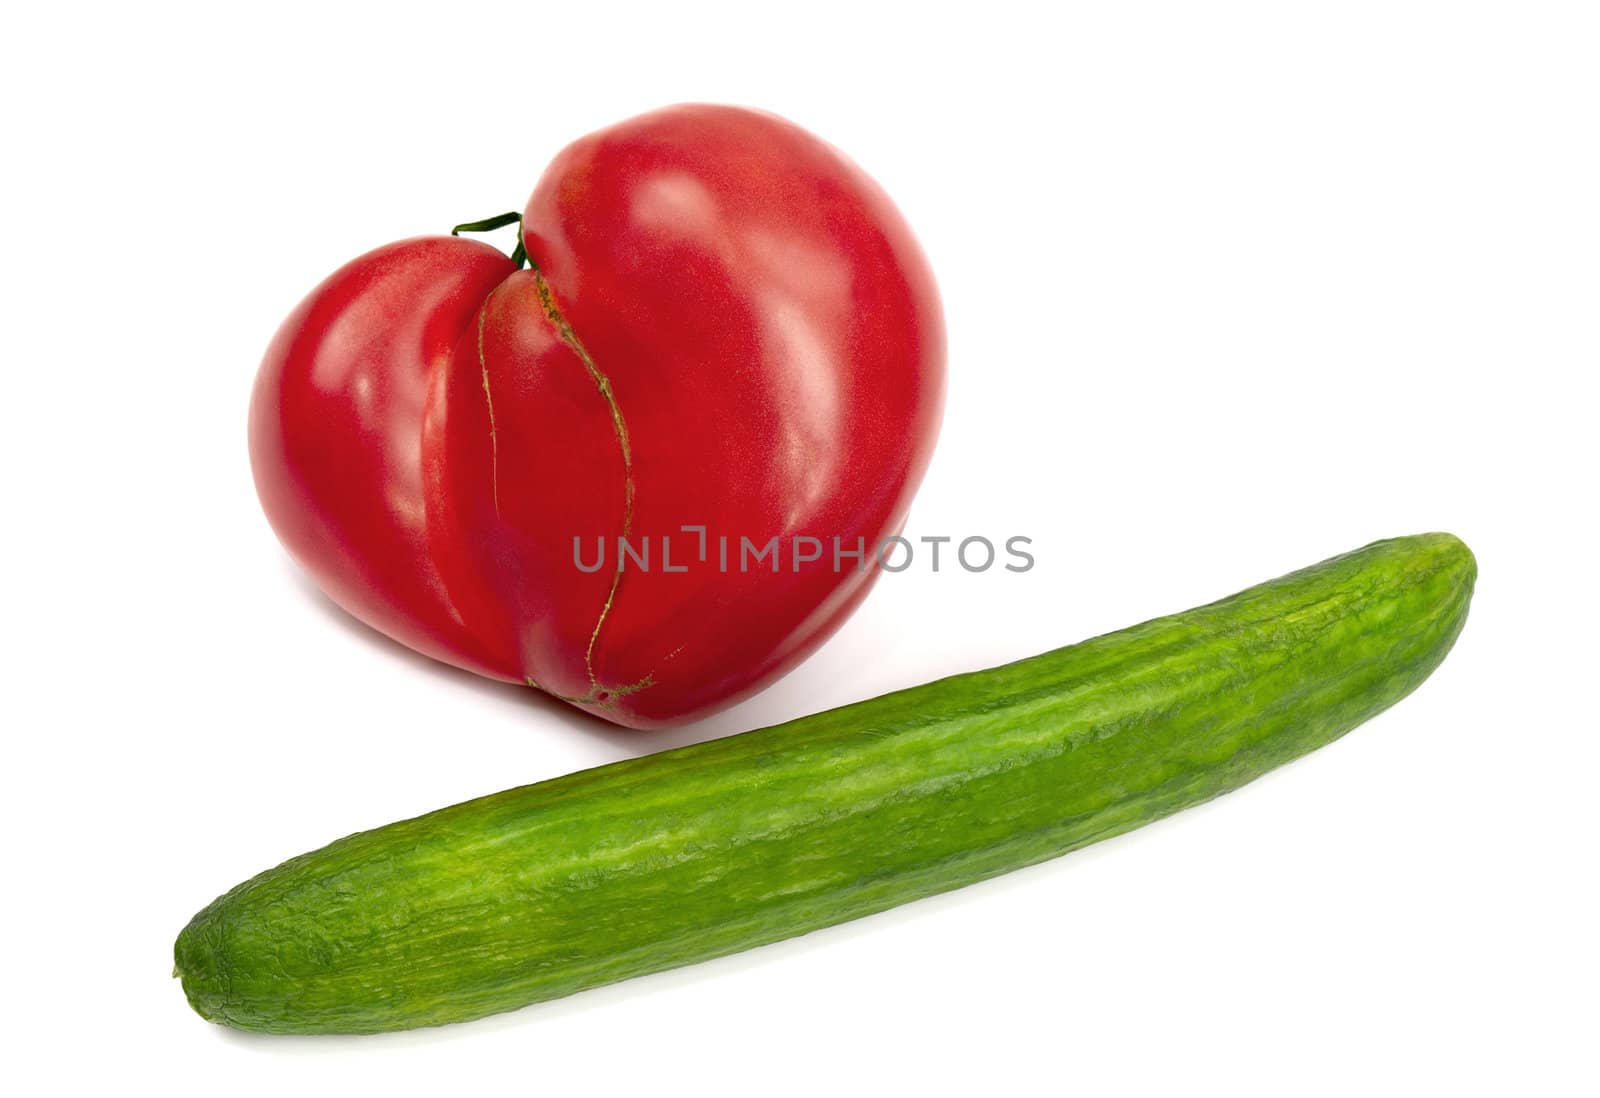 A giant heart-shaped tomato and longest cucumber